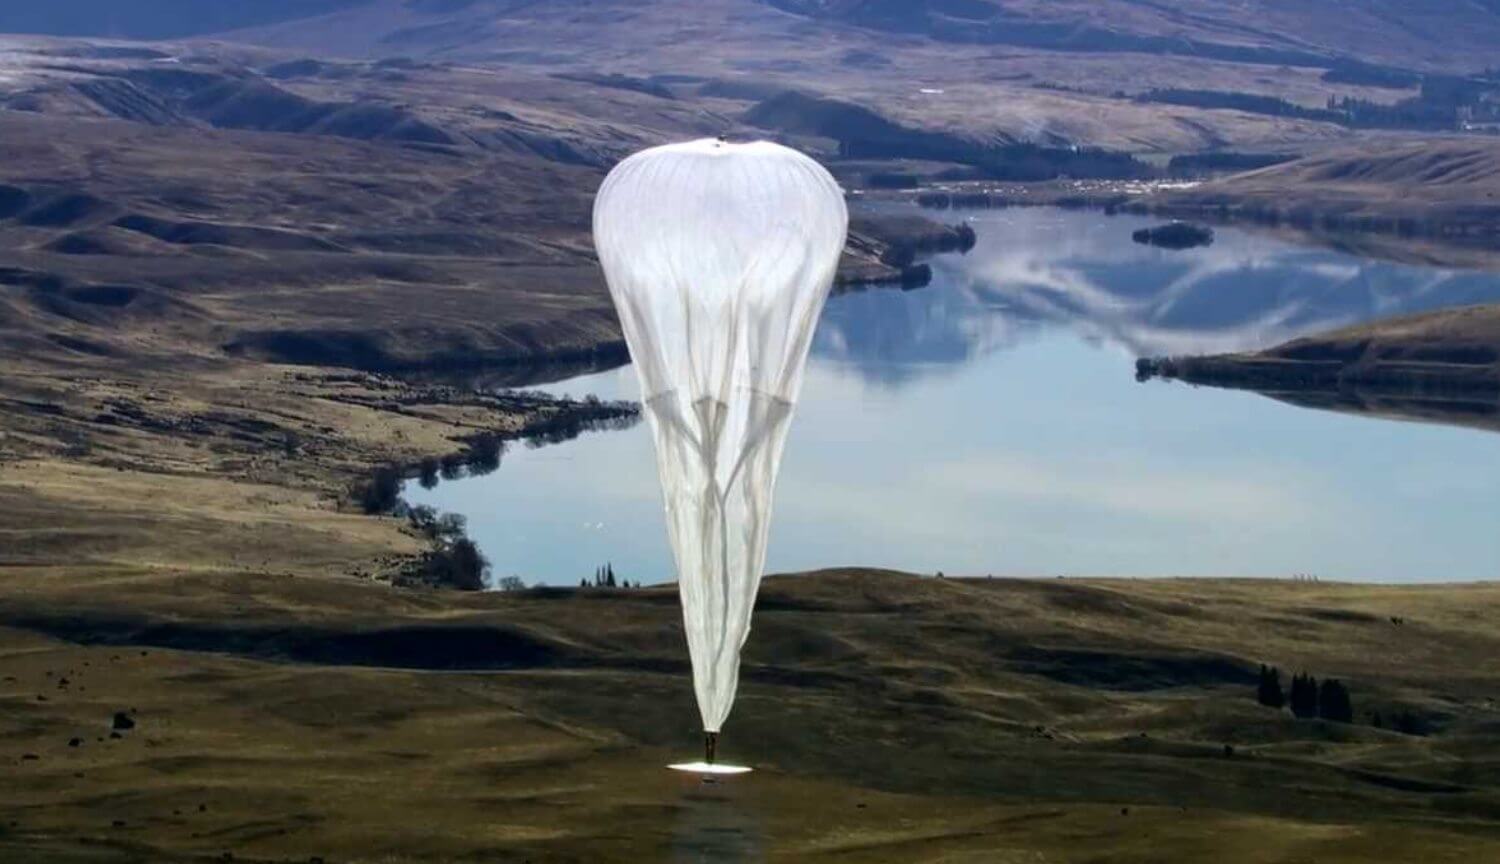 Balloon Google distributed the Internet 223 days without stopping